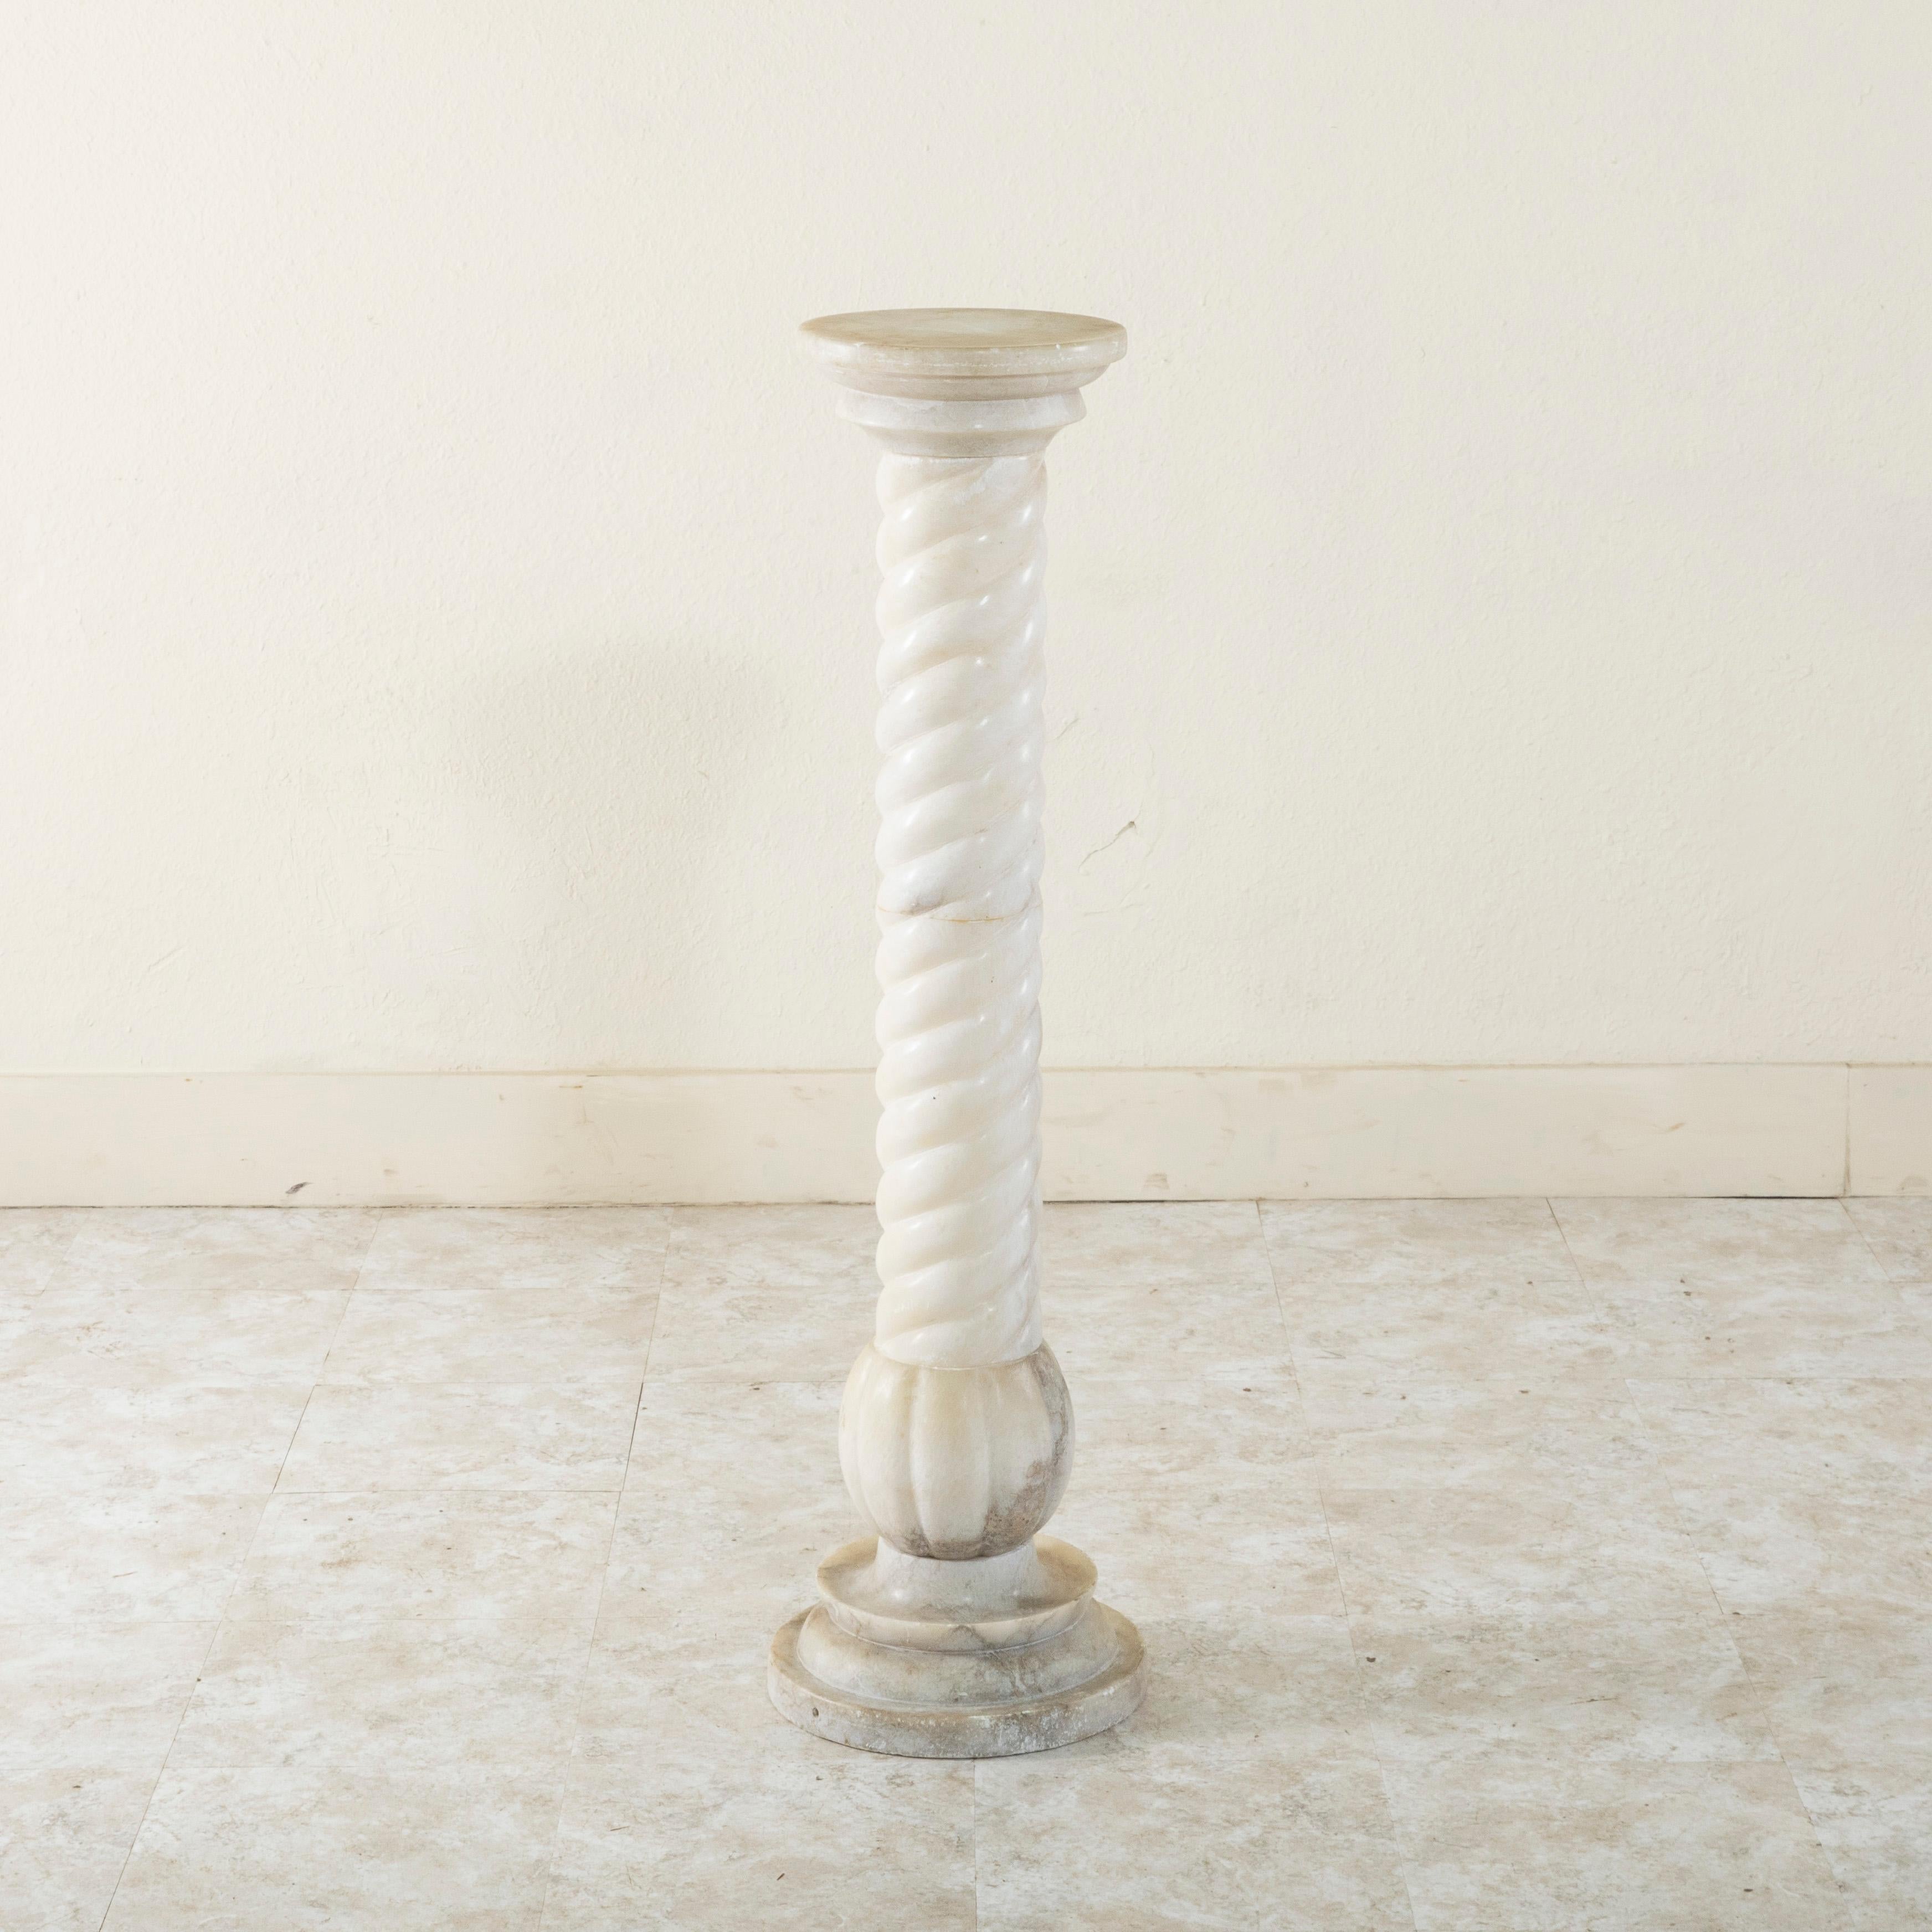 This early twentieth century French alabaster column or pedestal stands at 42 inches in height and features a spiraling barley twist along its central pillar. Resting on an 11.5 inch diameter plinth base, this column would be a wonderful addition to